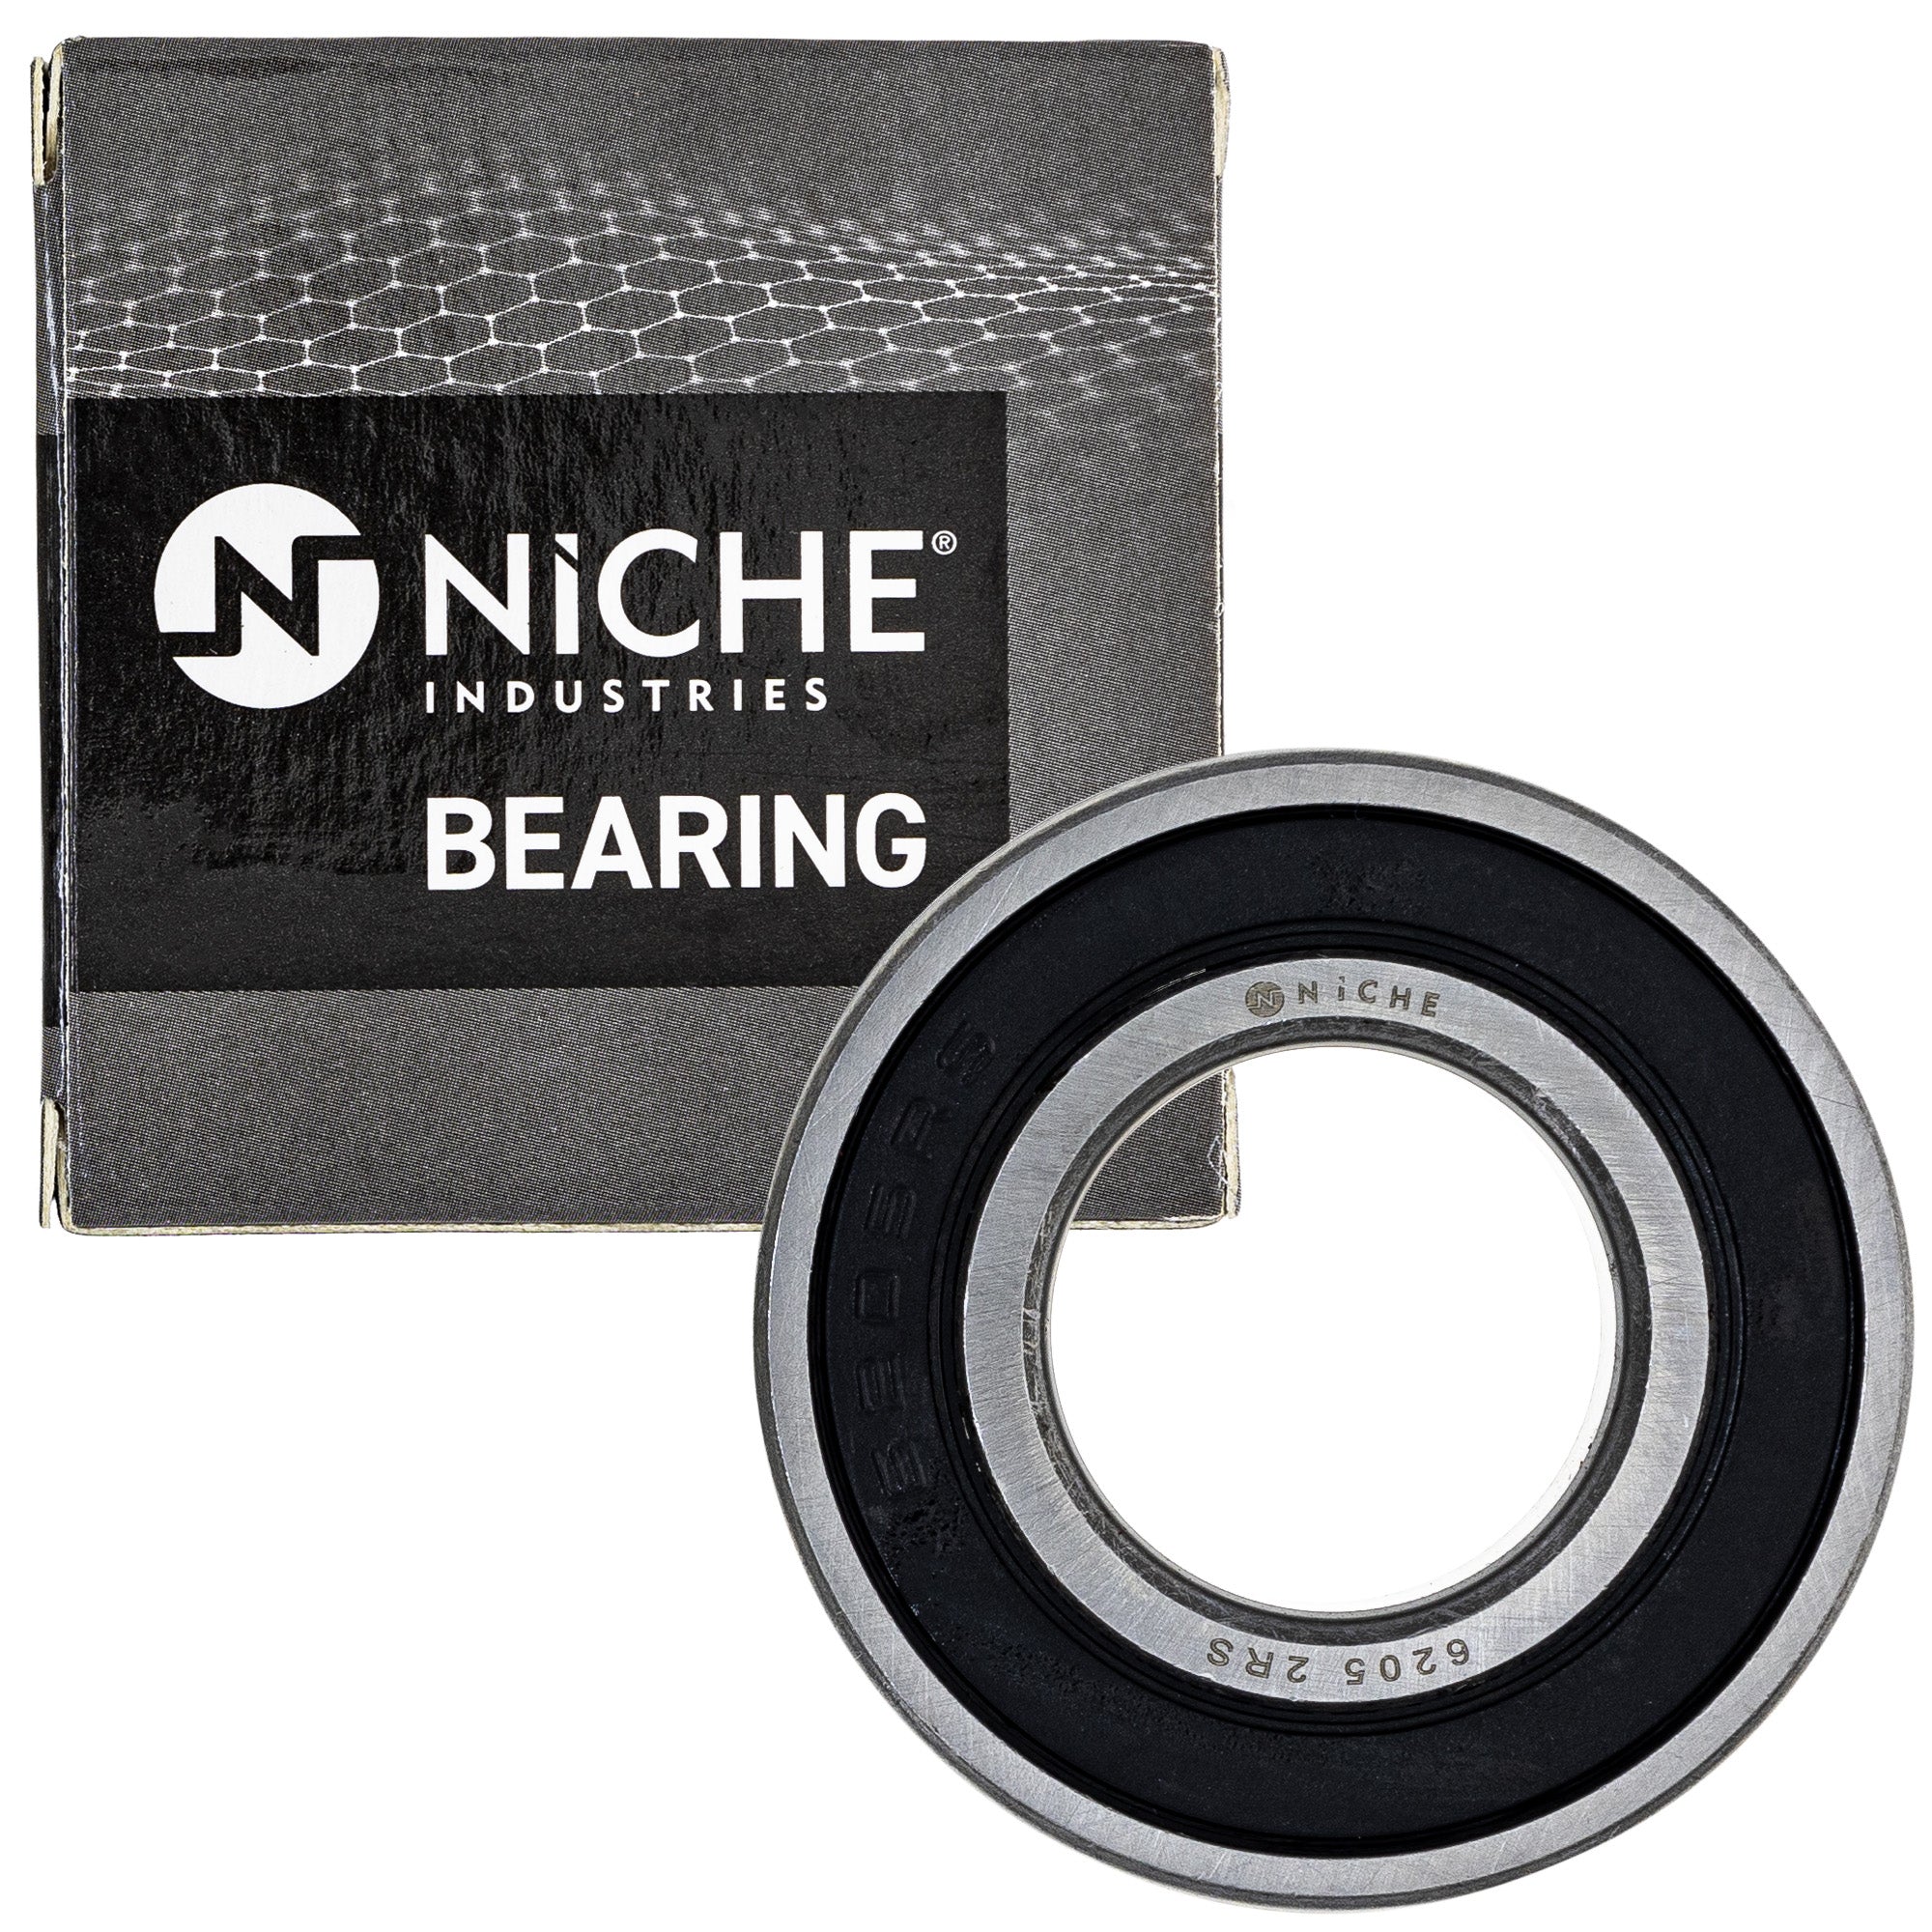 NICHE MK1009183 Wheel Bearing Seal Kit for zOTHER Ref No ST1300